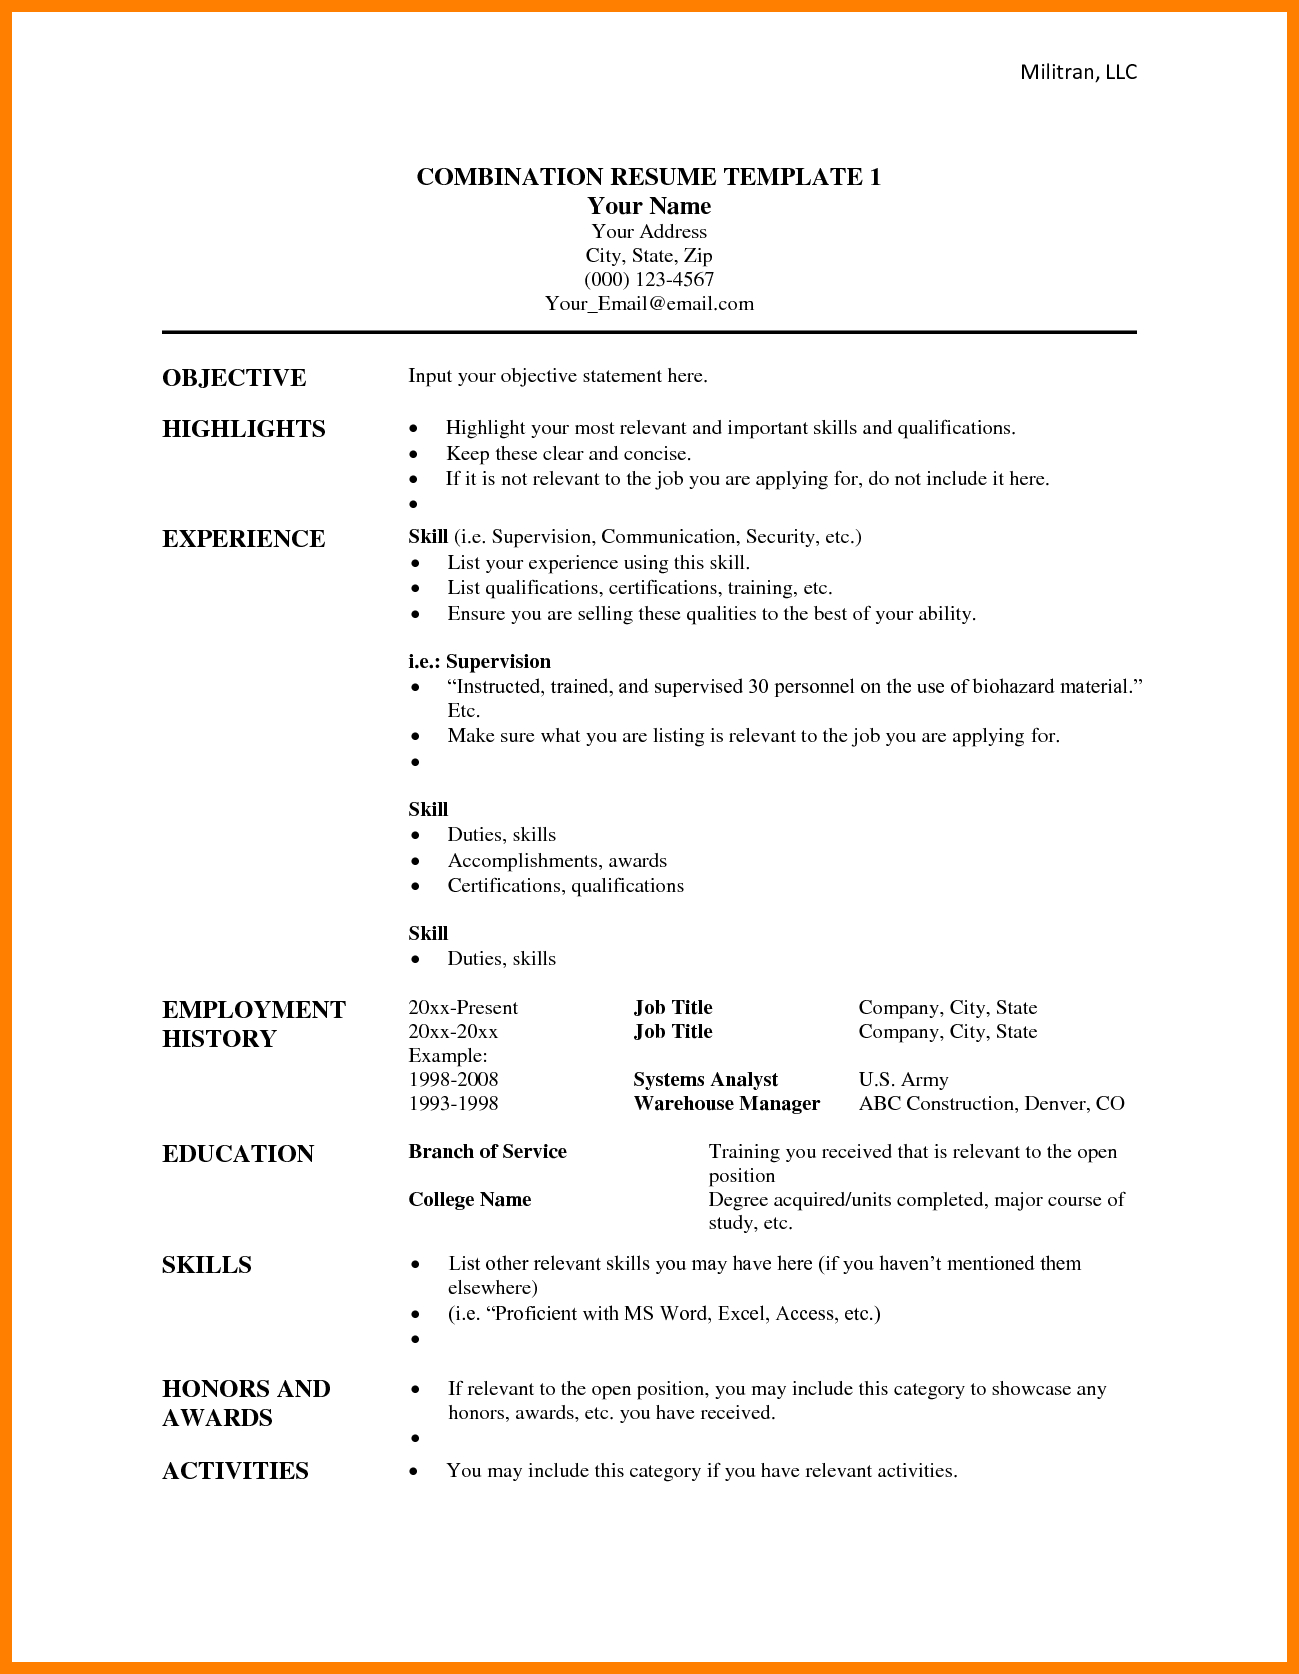 8+ Functional Resume Template Microsoft Word | Reptile Shop With Combination Resume Template Word